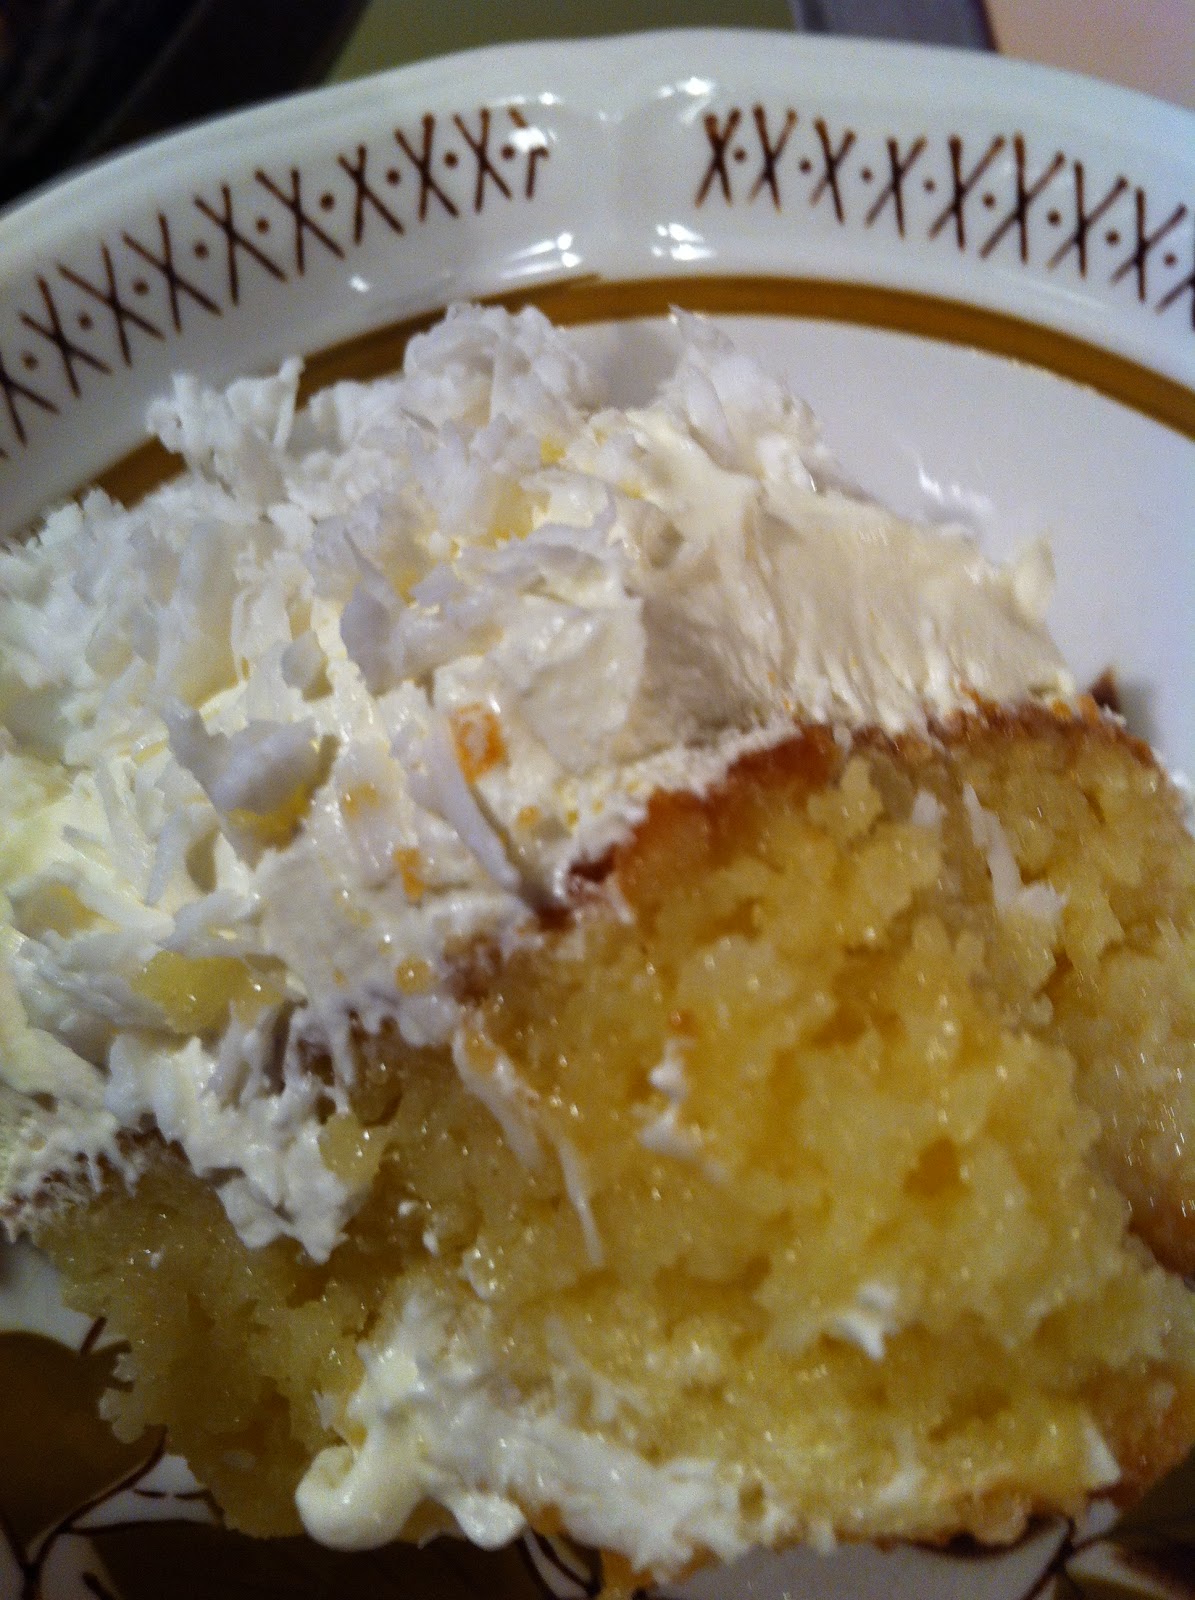  coconut cake is so moist and yummy! Yes, this cake is to die for. Wait